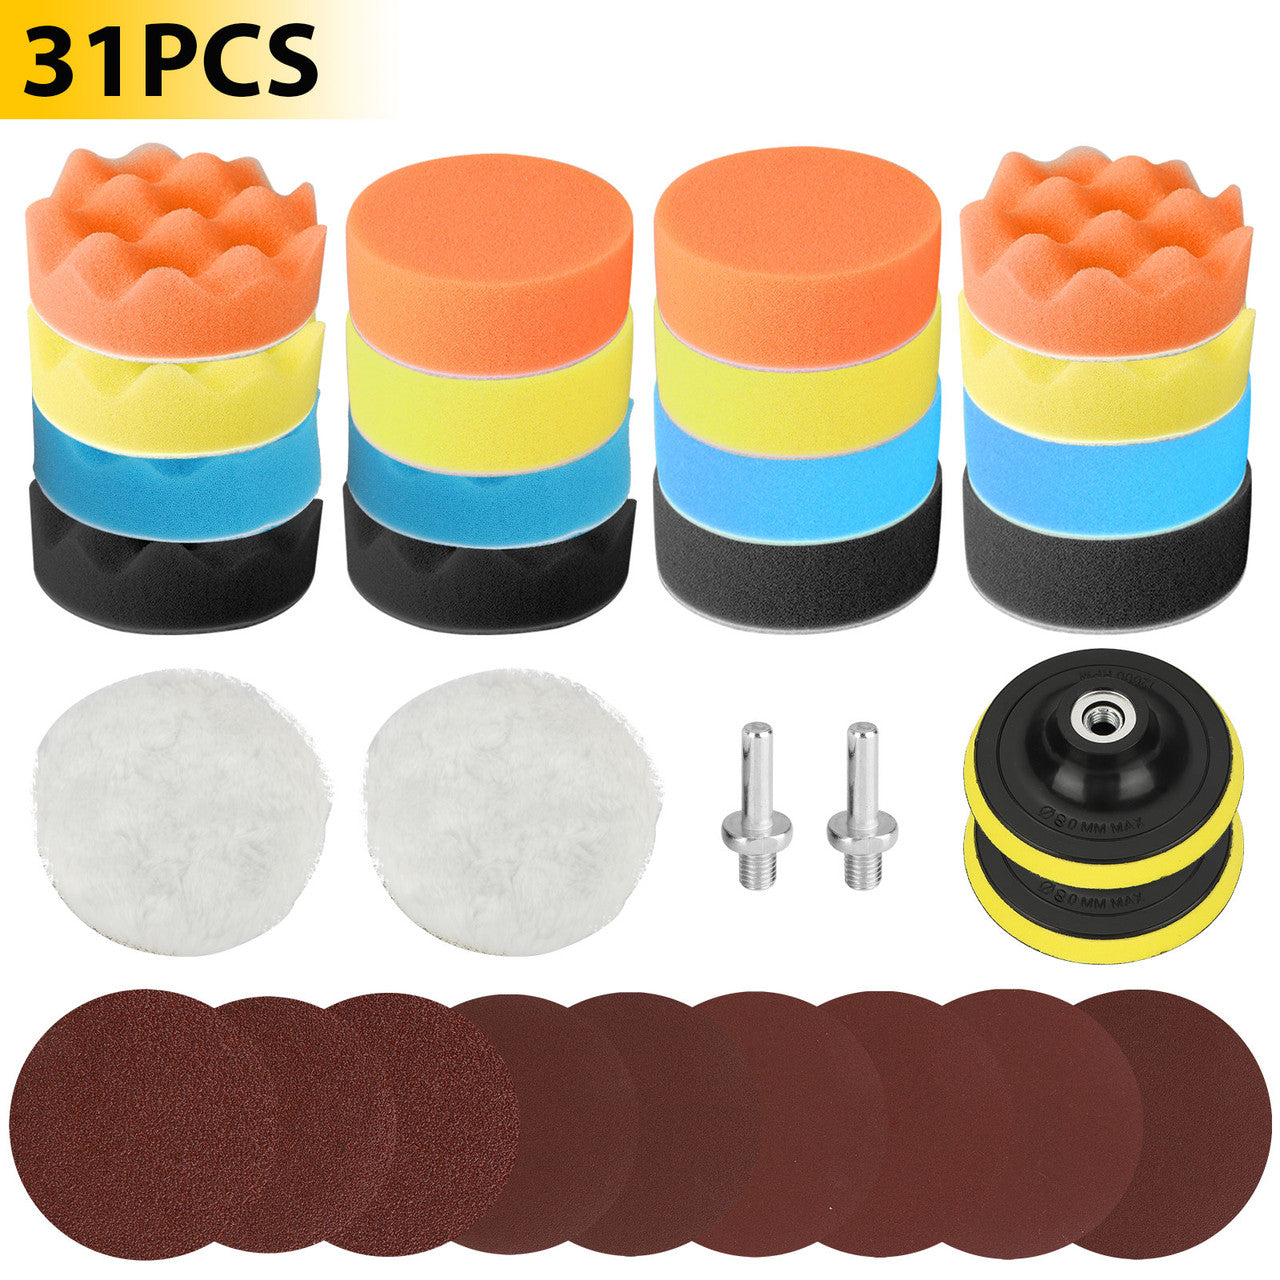 31Pcs 3 Inch Car Polishing & Buffing Sponge Pads Kit, Wool Bonnet Sponge Pad for Household Electric Drill and Auto Polisher with M14 Drill Adapter for Washing Cleaning Waxing Dusting Sealing Glaze